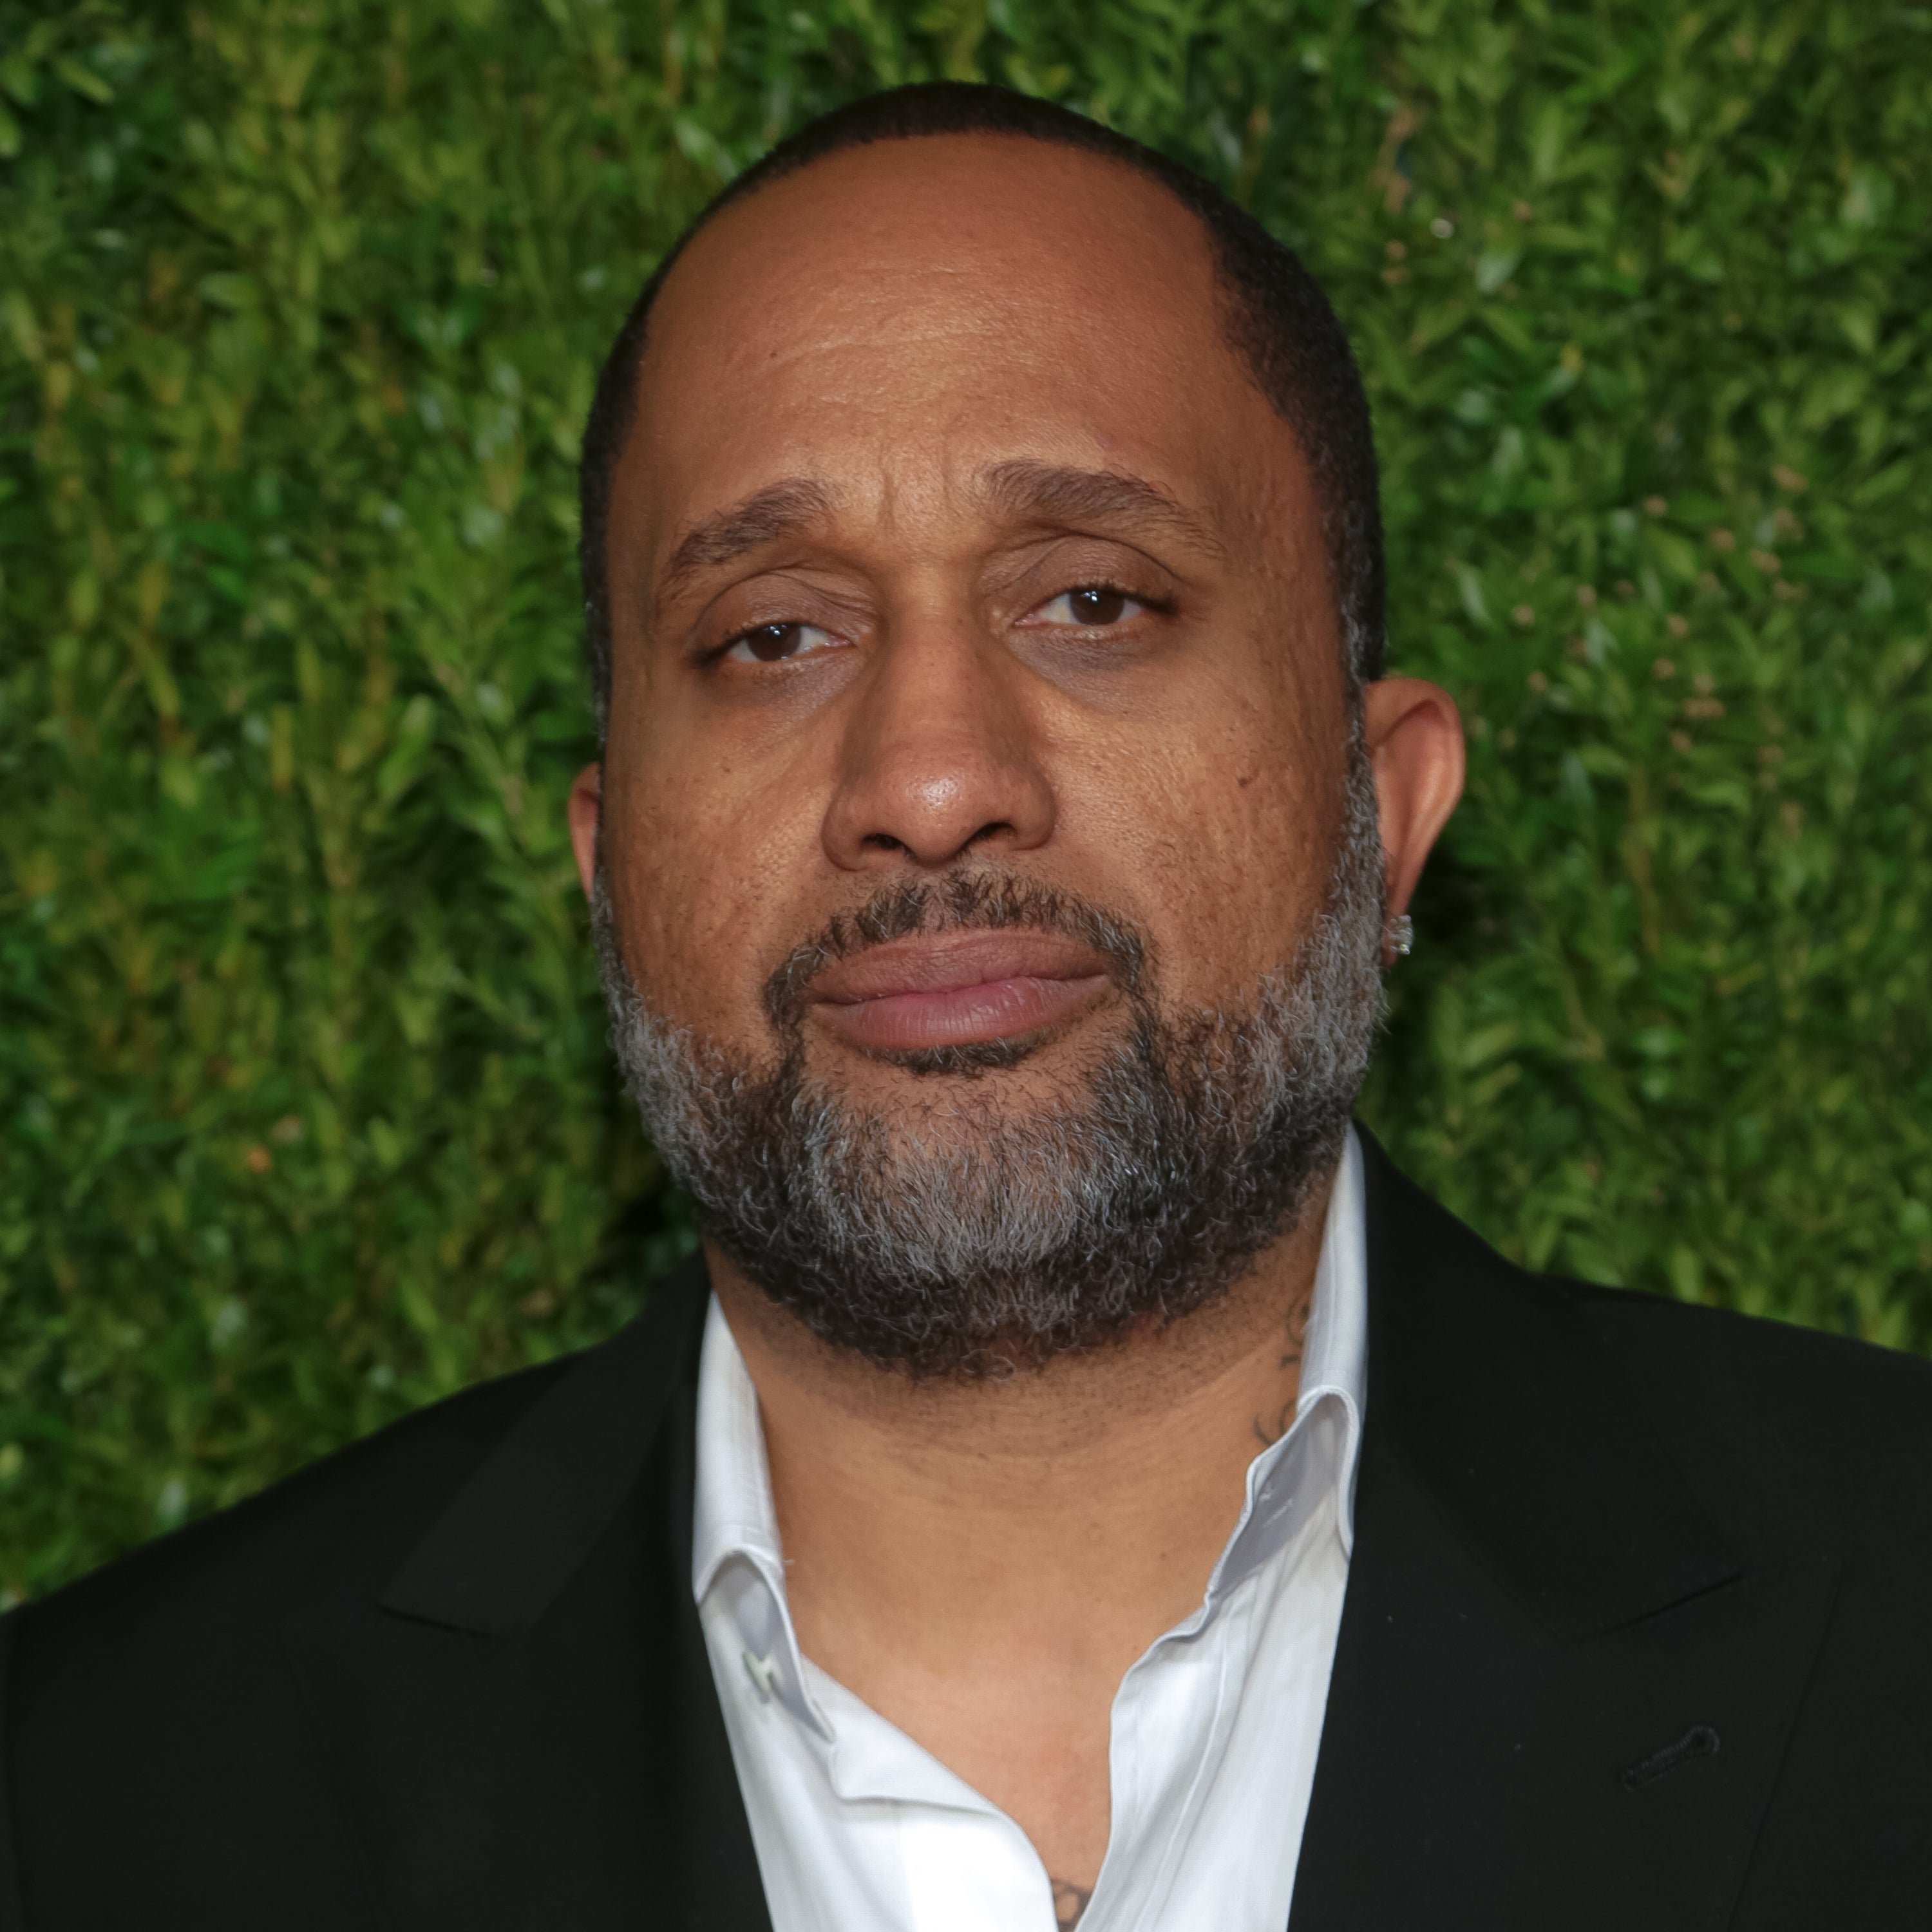 'Black-ish' Creator Kenya Barris Says It's Time To Have Difficult Conversations
